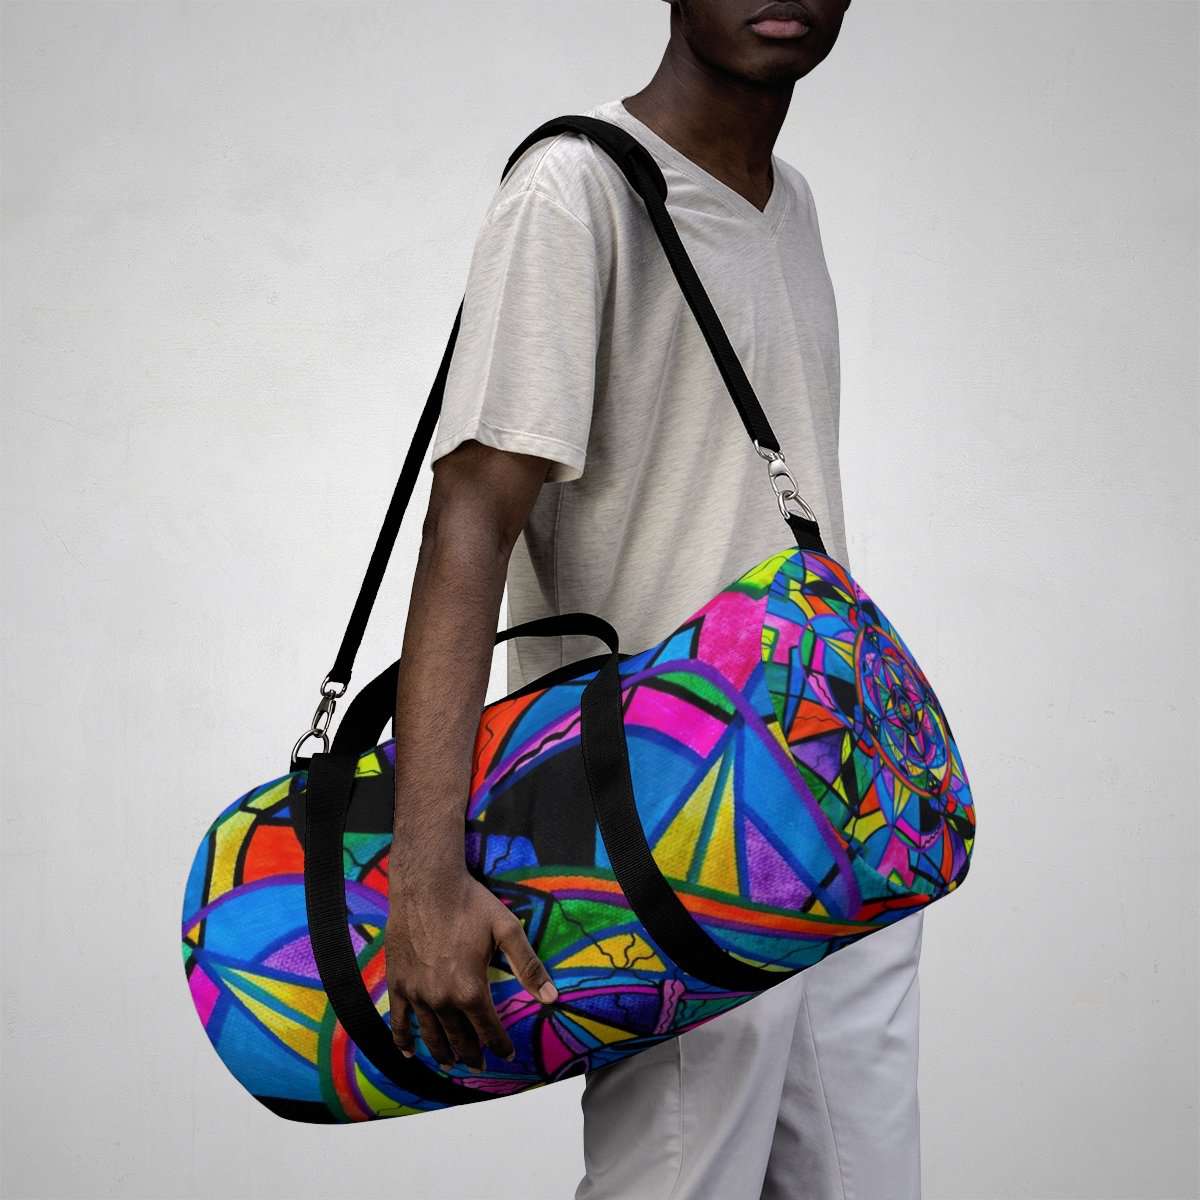 the-one-place-to-find-cheap-activating-potential-duffle-bag-online-now_11.jpg